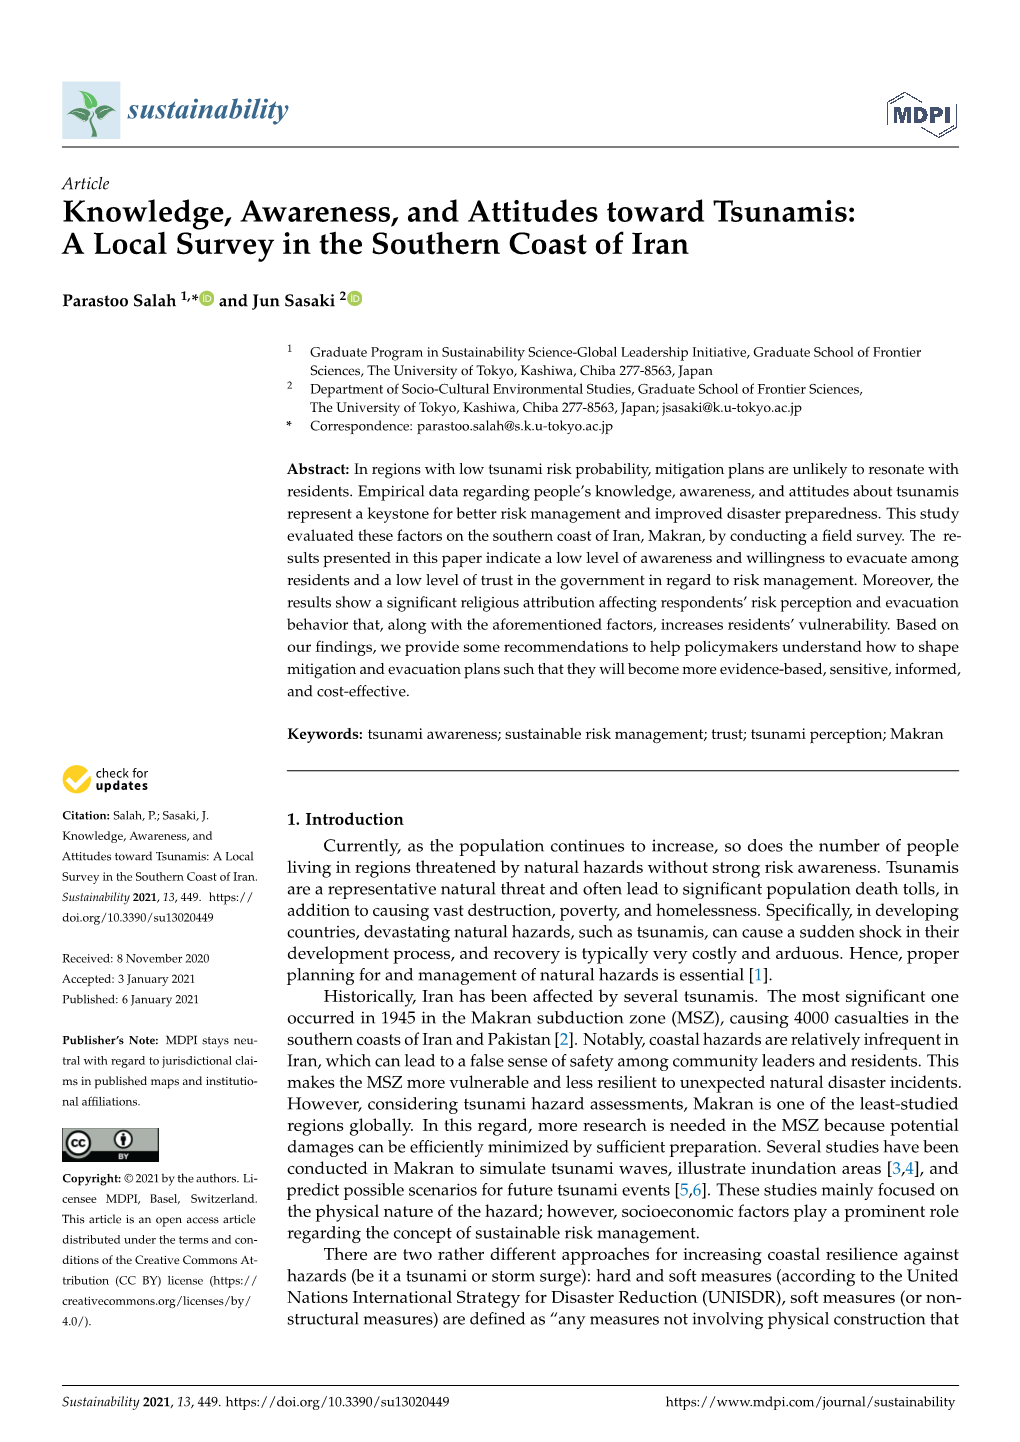 Knowledge, Awareness, and Attitudes Toward Tsunamis: a Local Survey in the Southern Coast of Iran